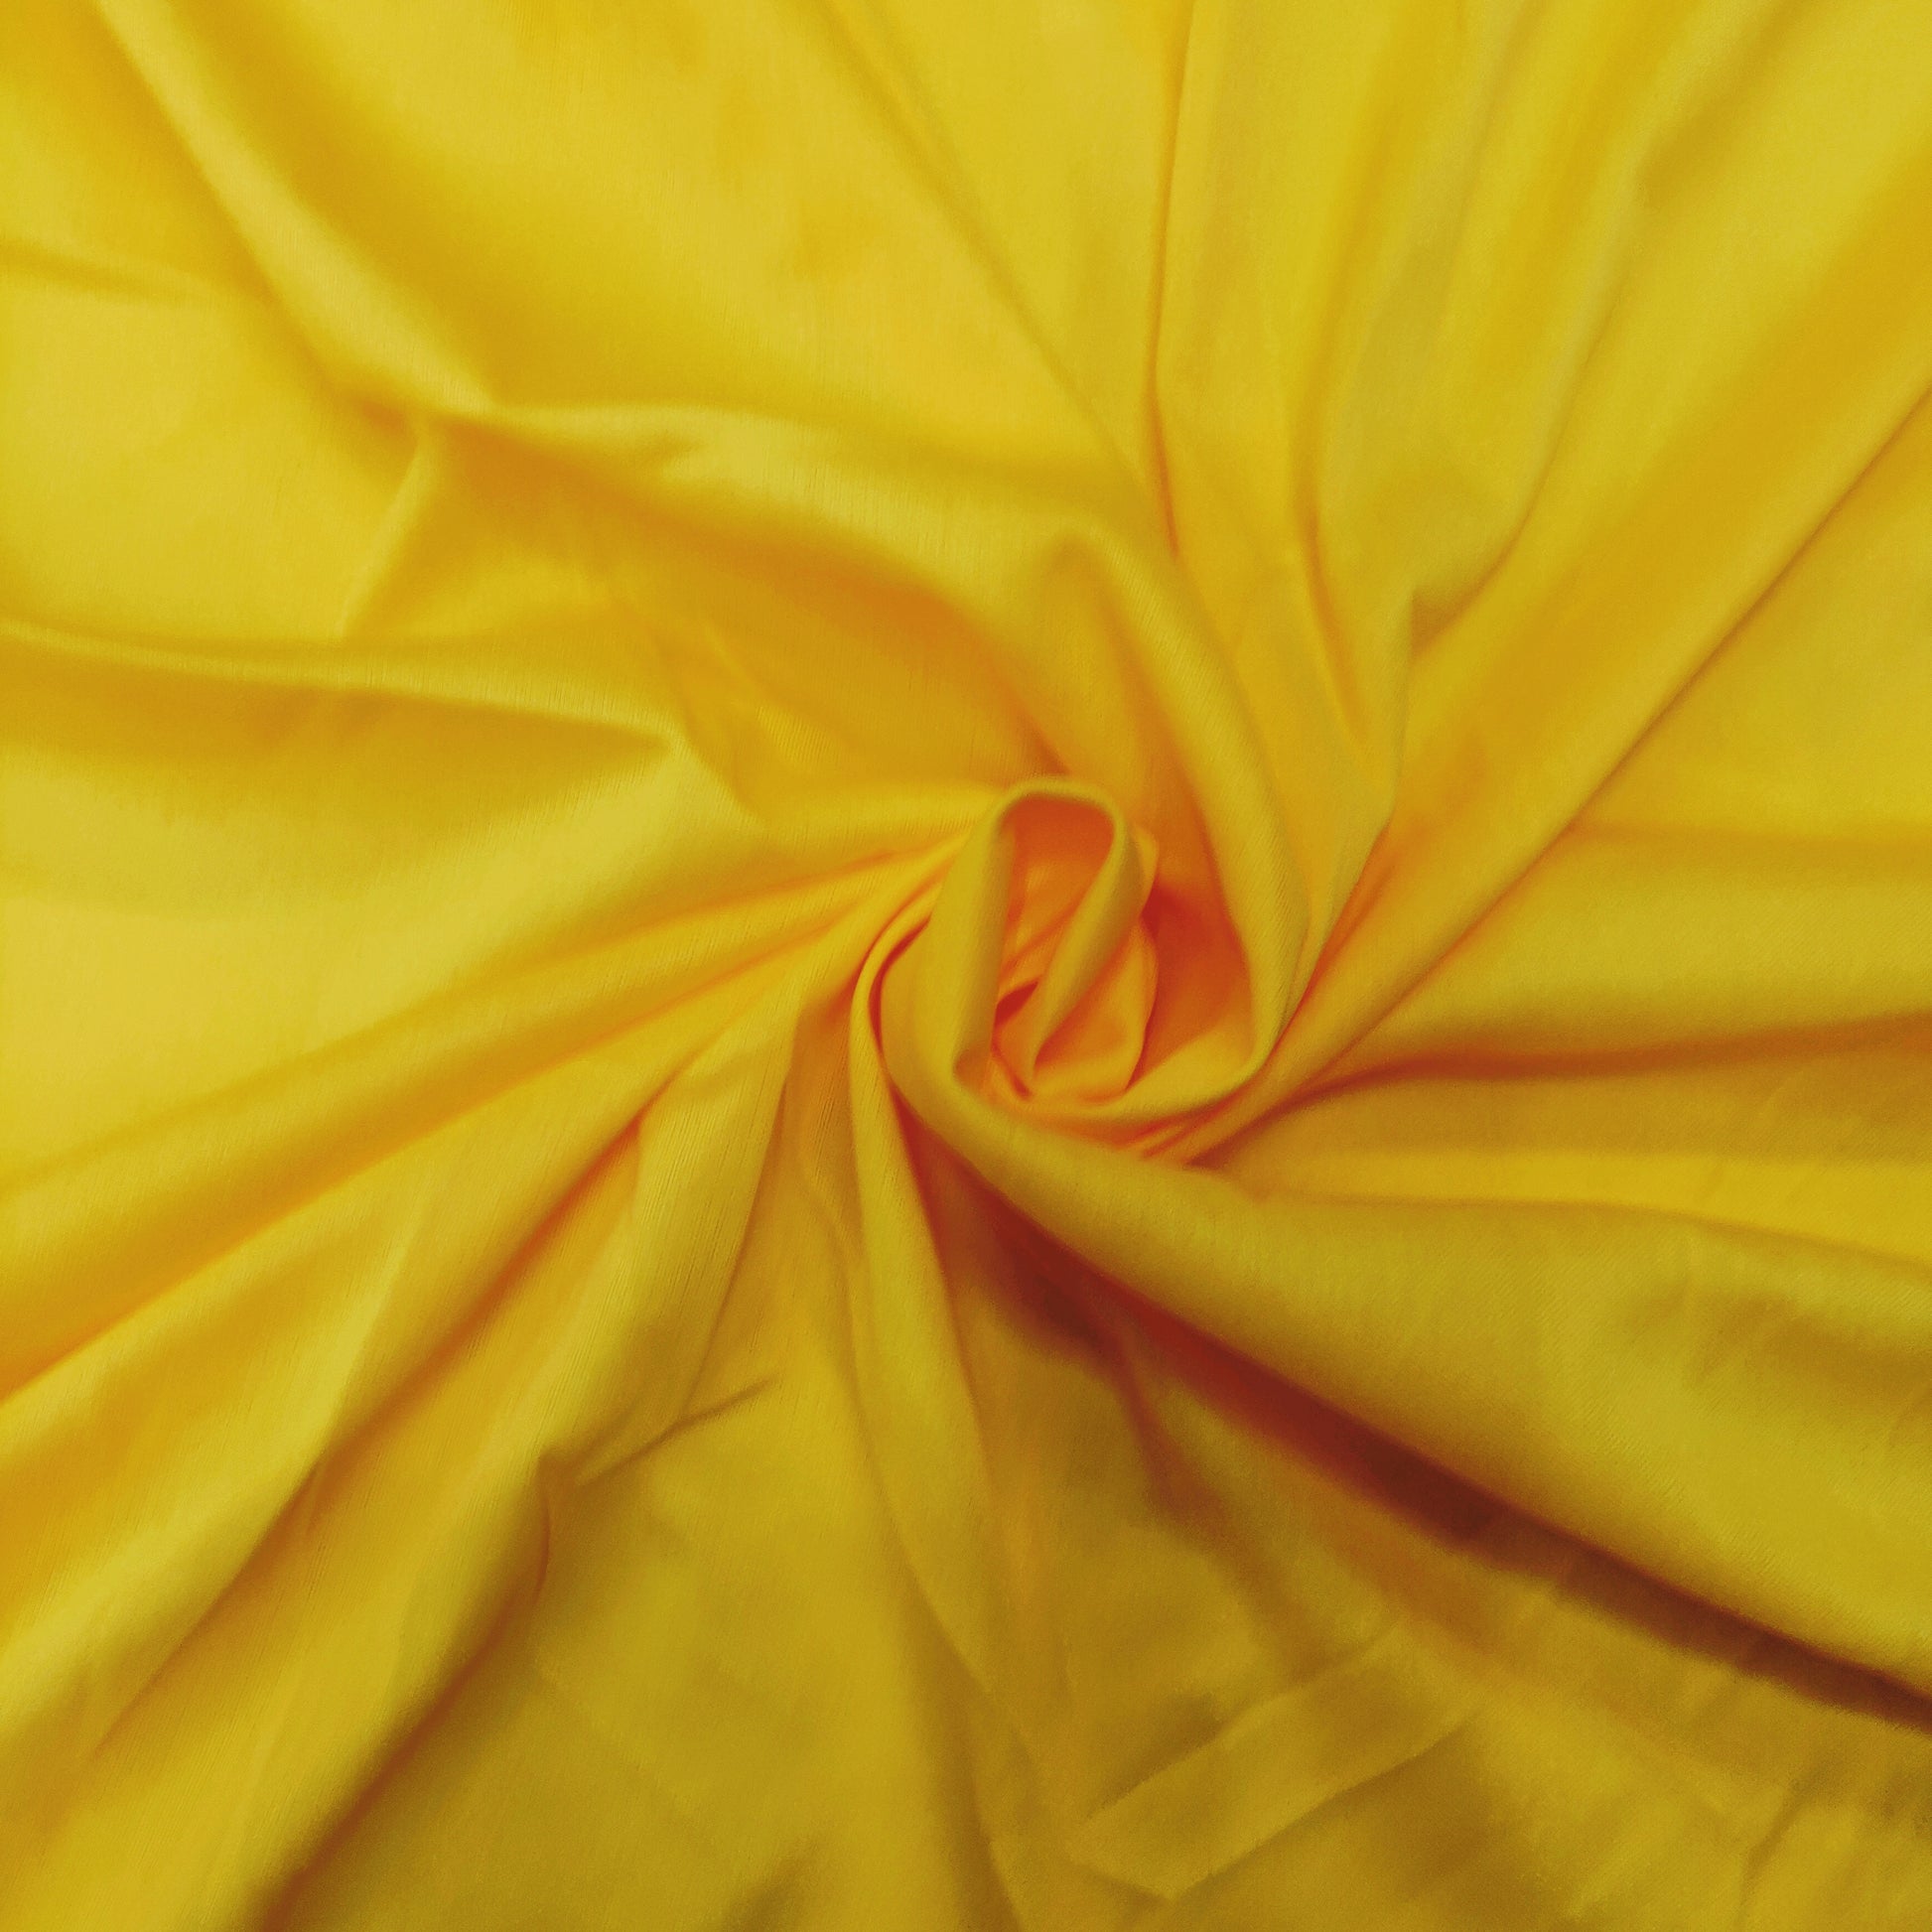 Yellow Solid Lycra Fabric